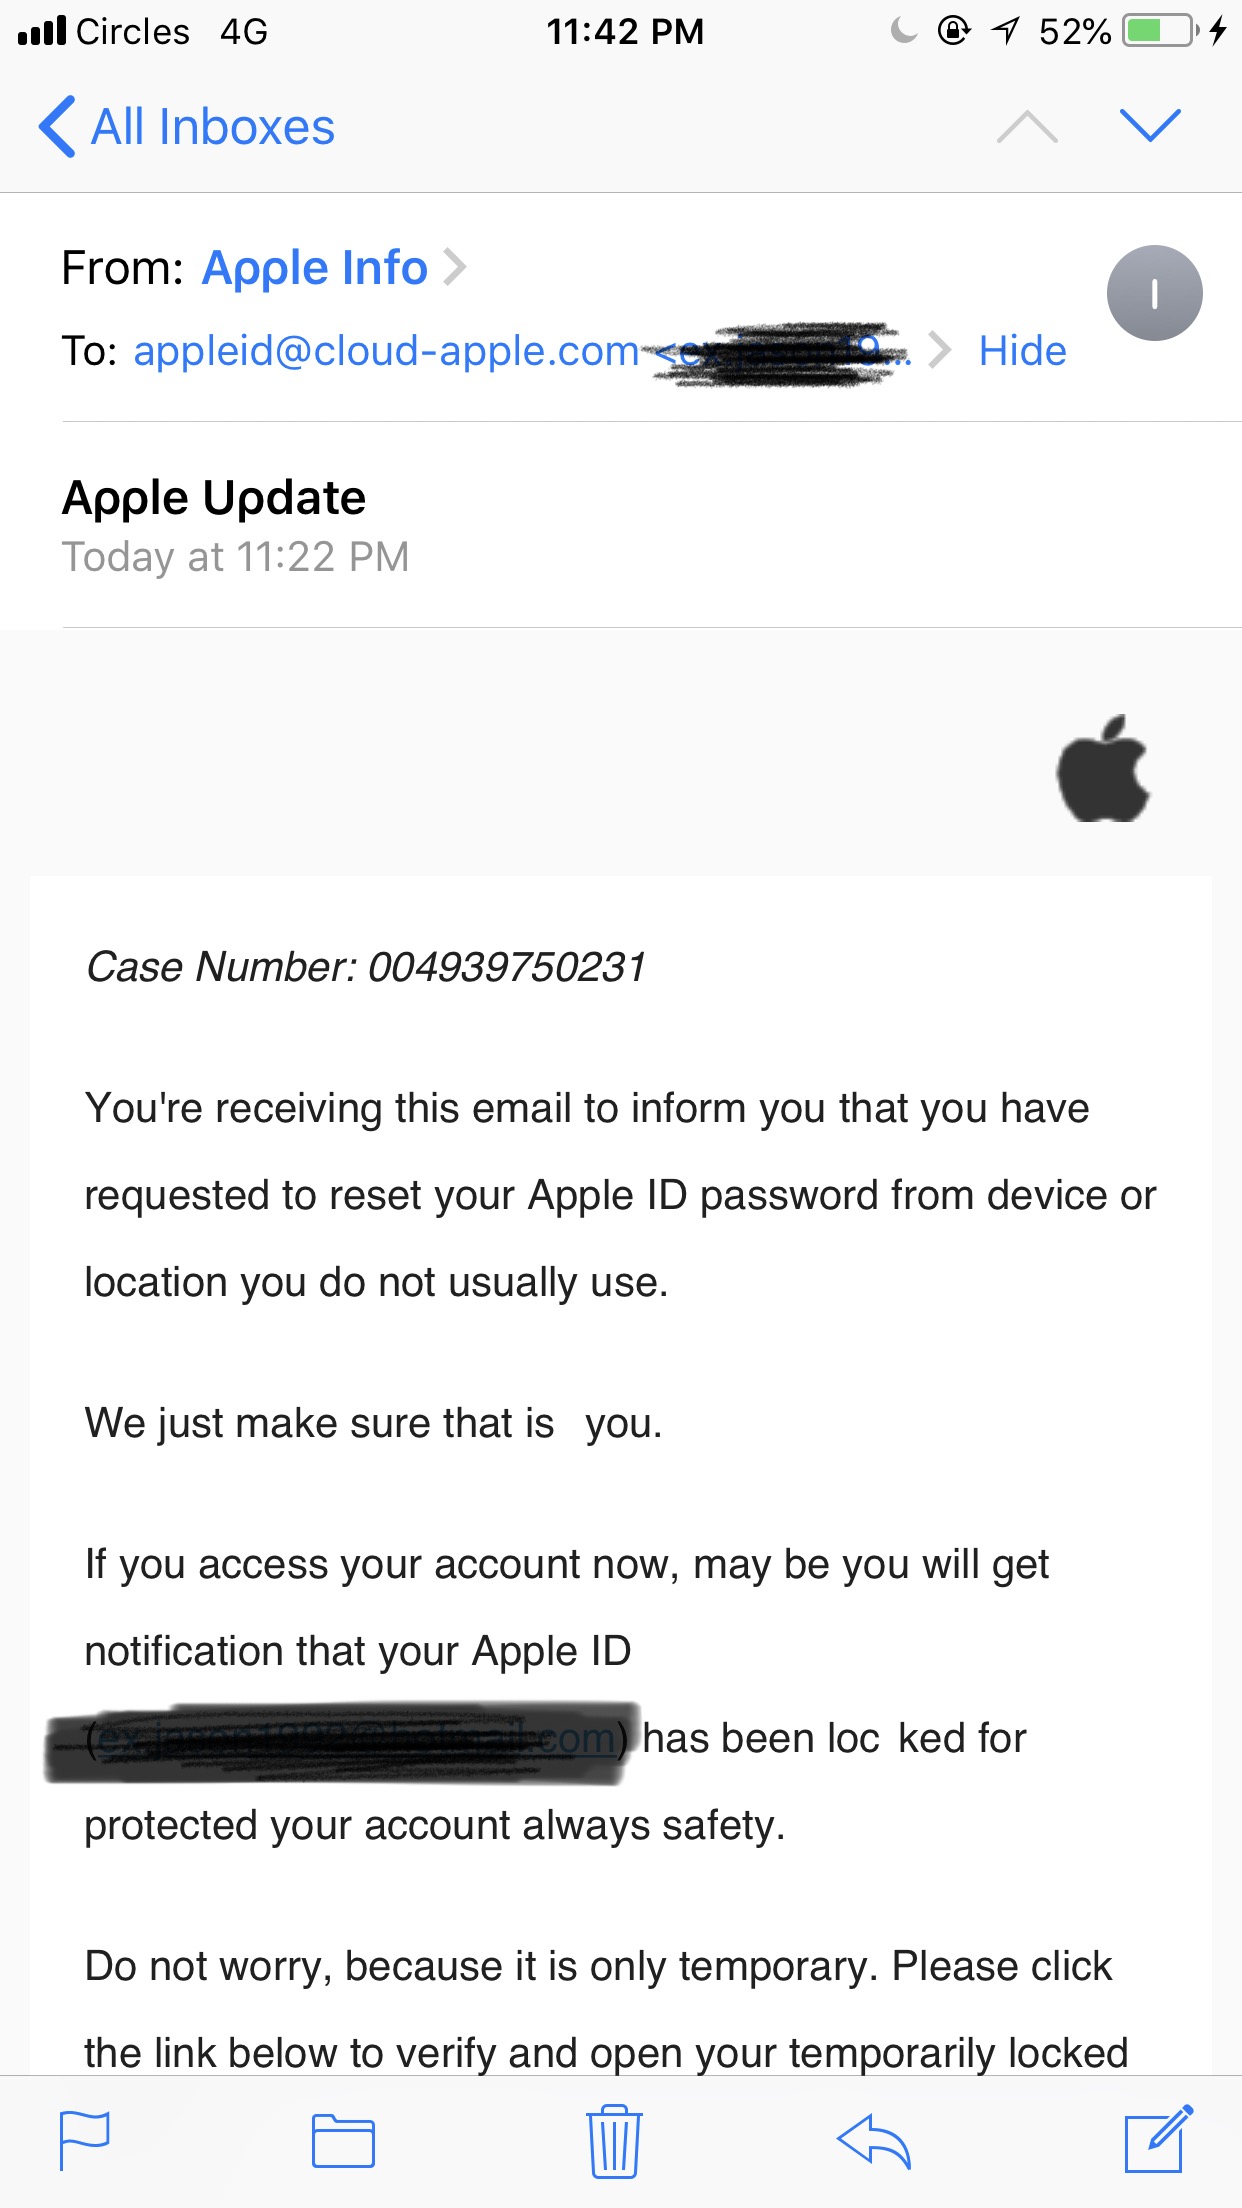 Does Apple Have an Email Service?